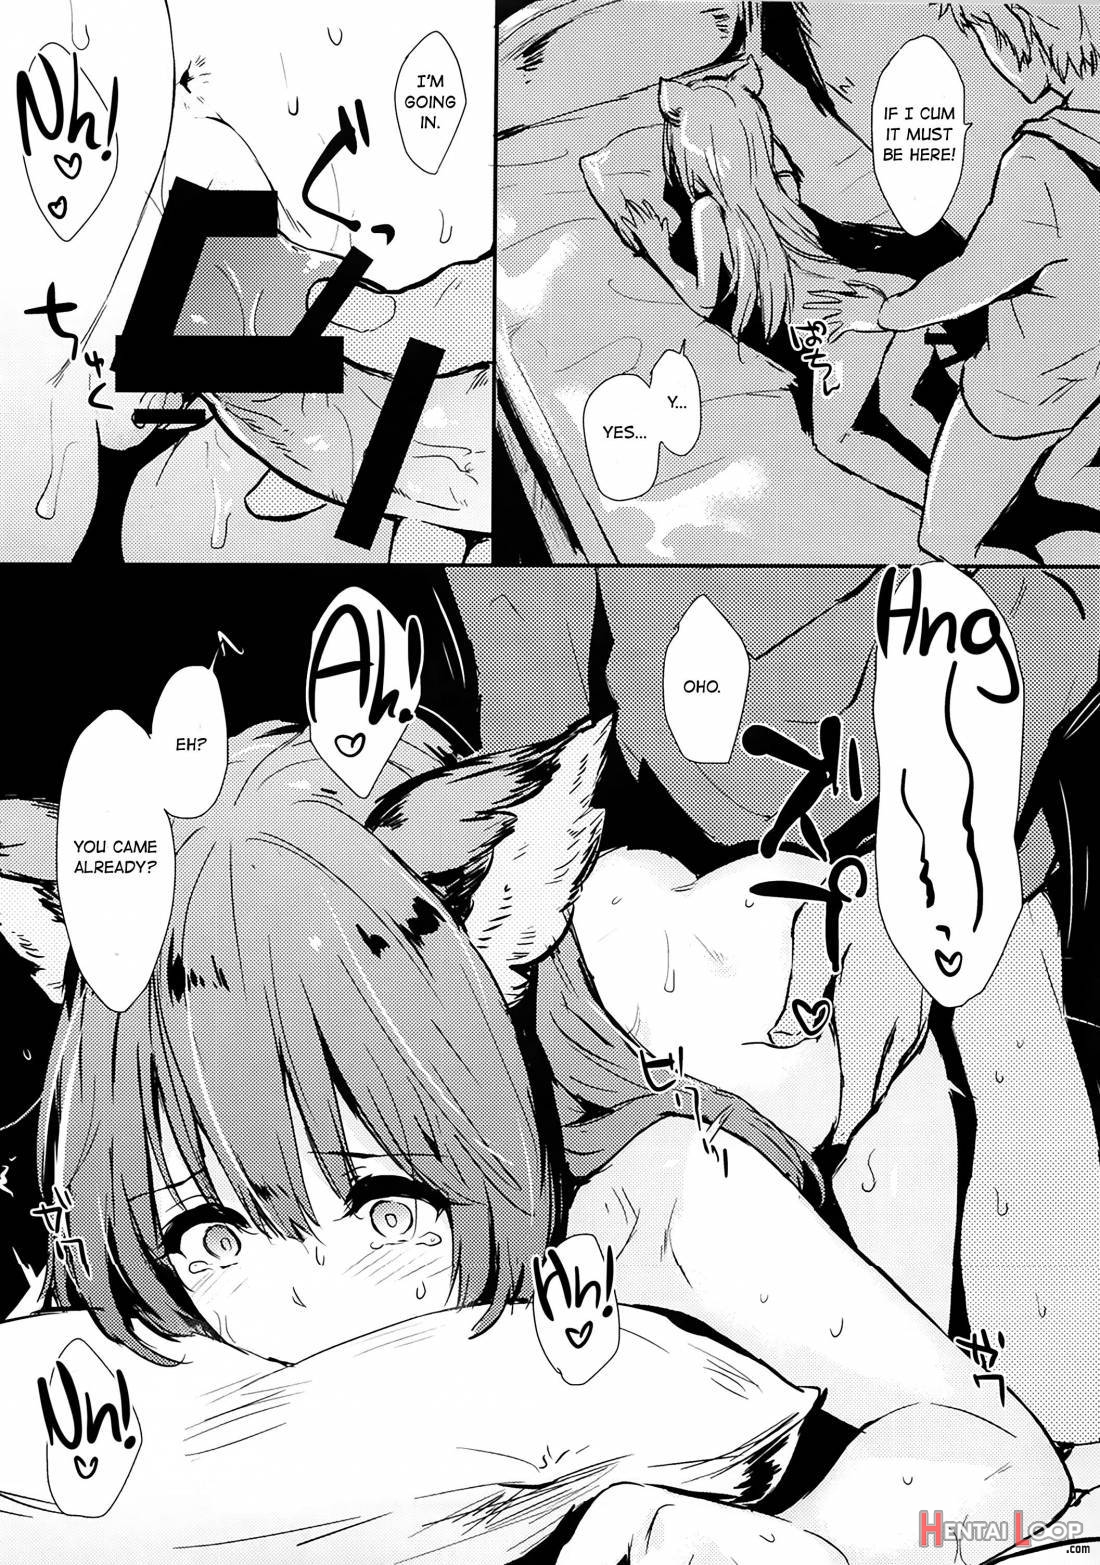 Aster-ppoi no! page 8